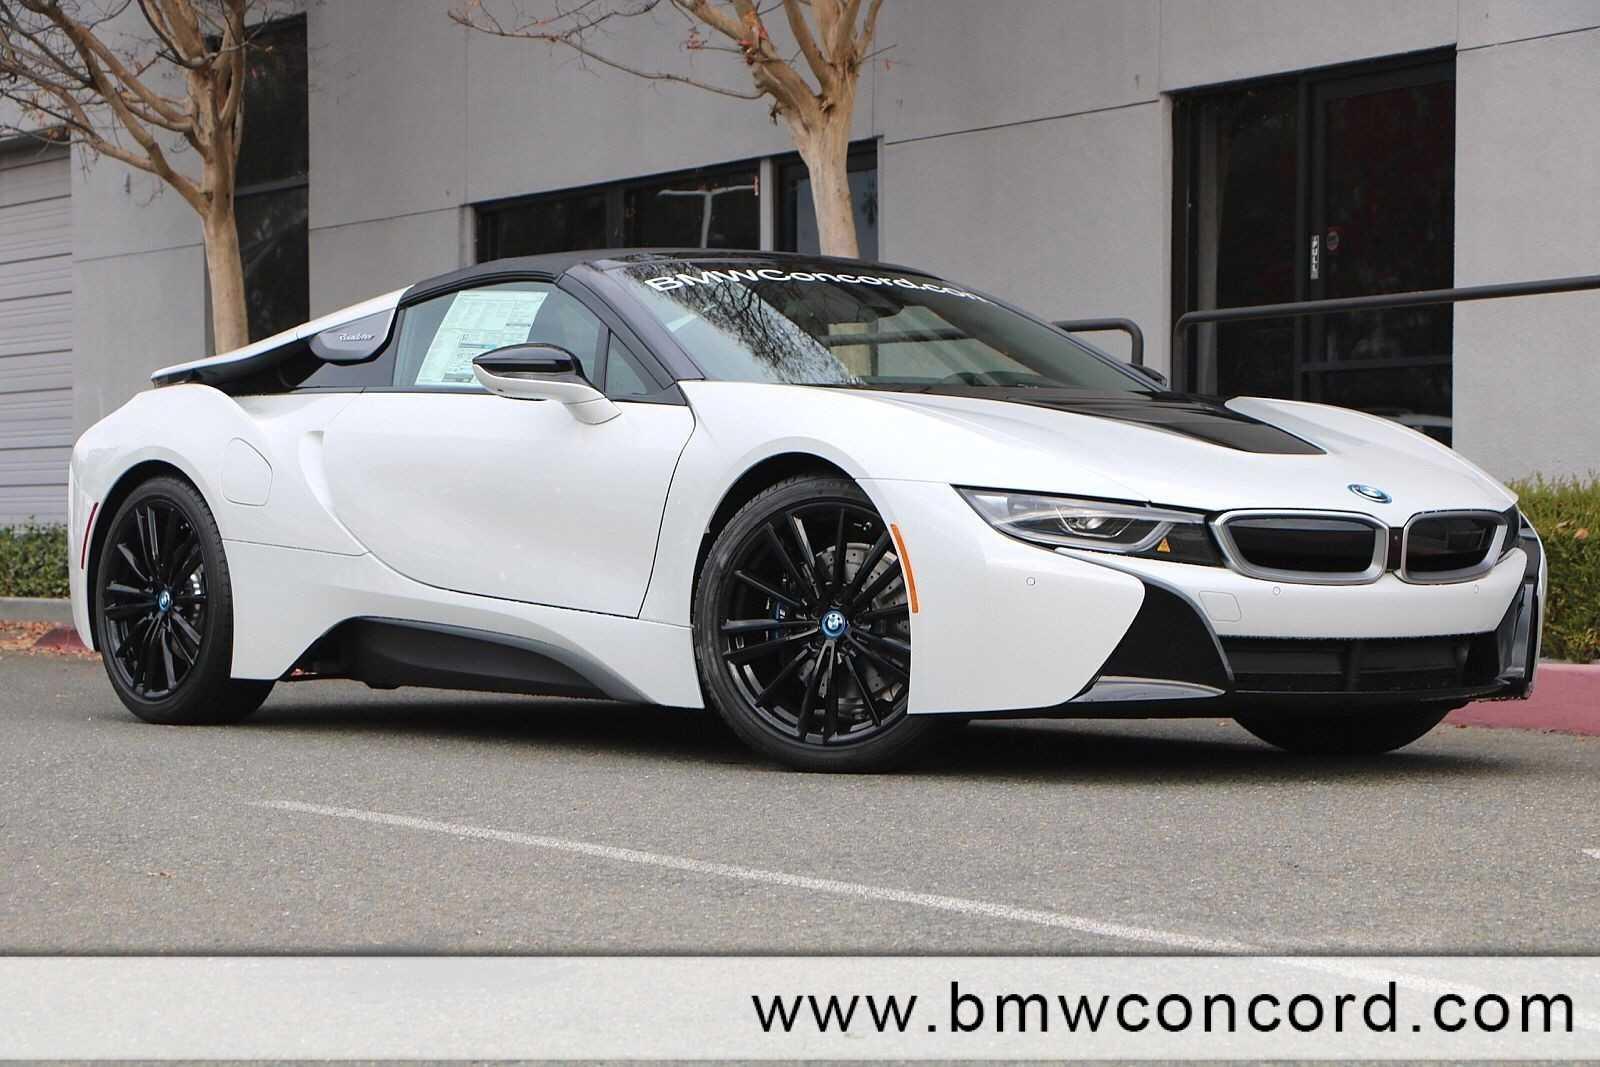 New 2019 BMW i8 Roadster Convertible in Concord #190156 ...